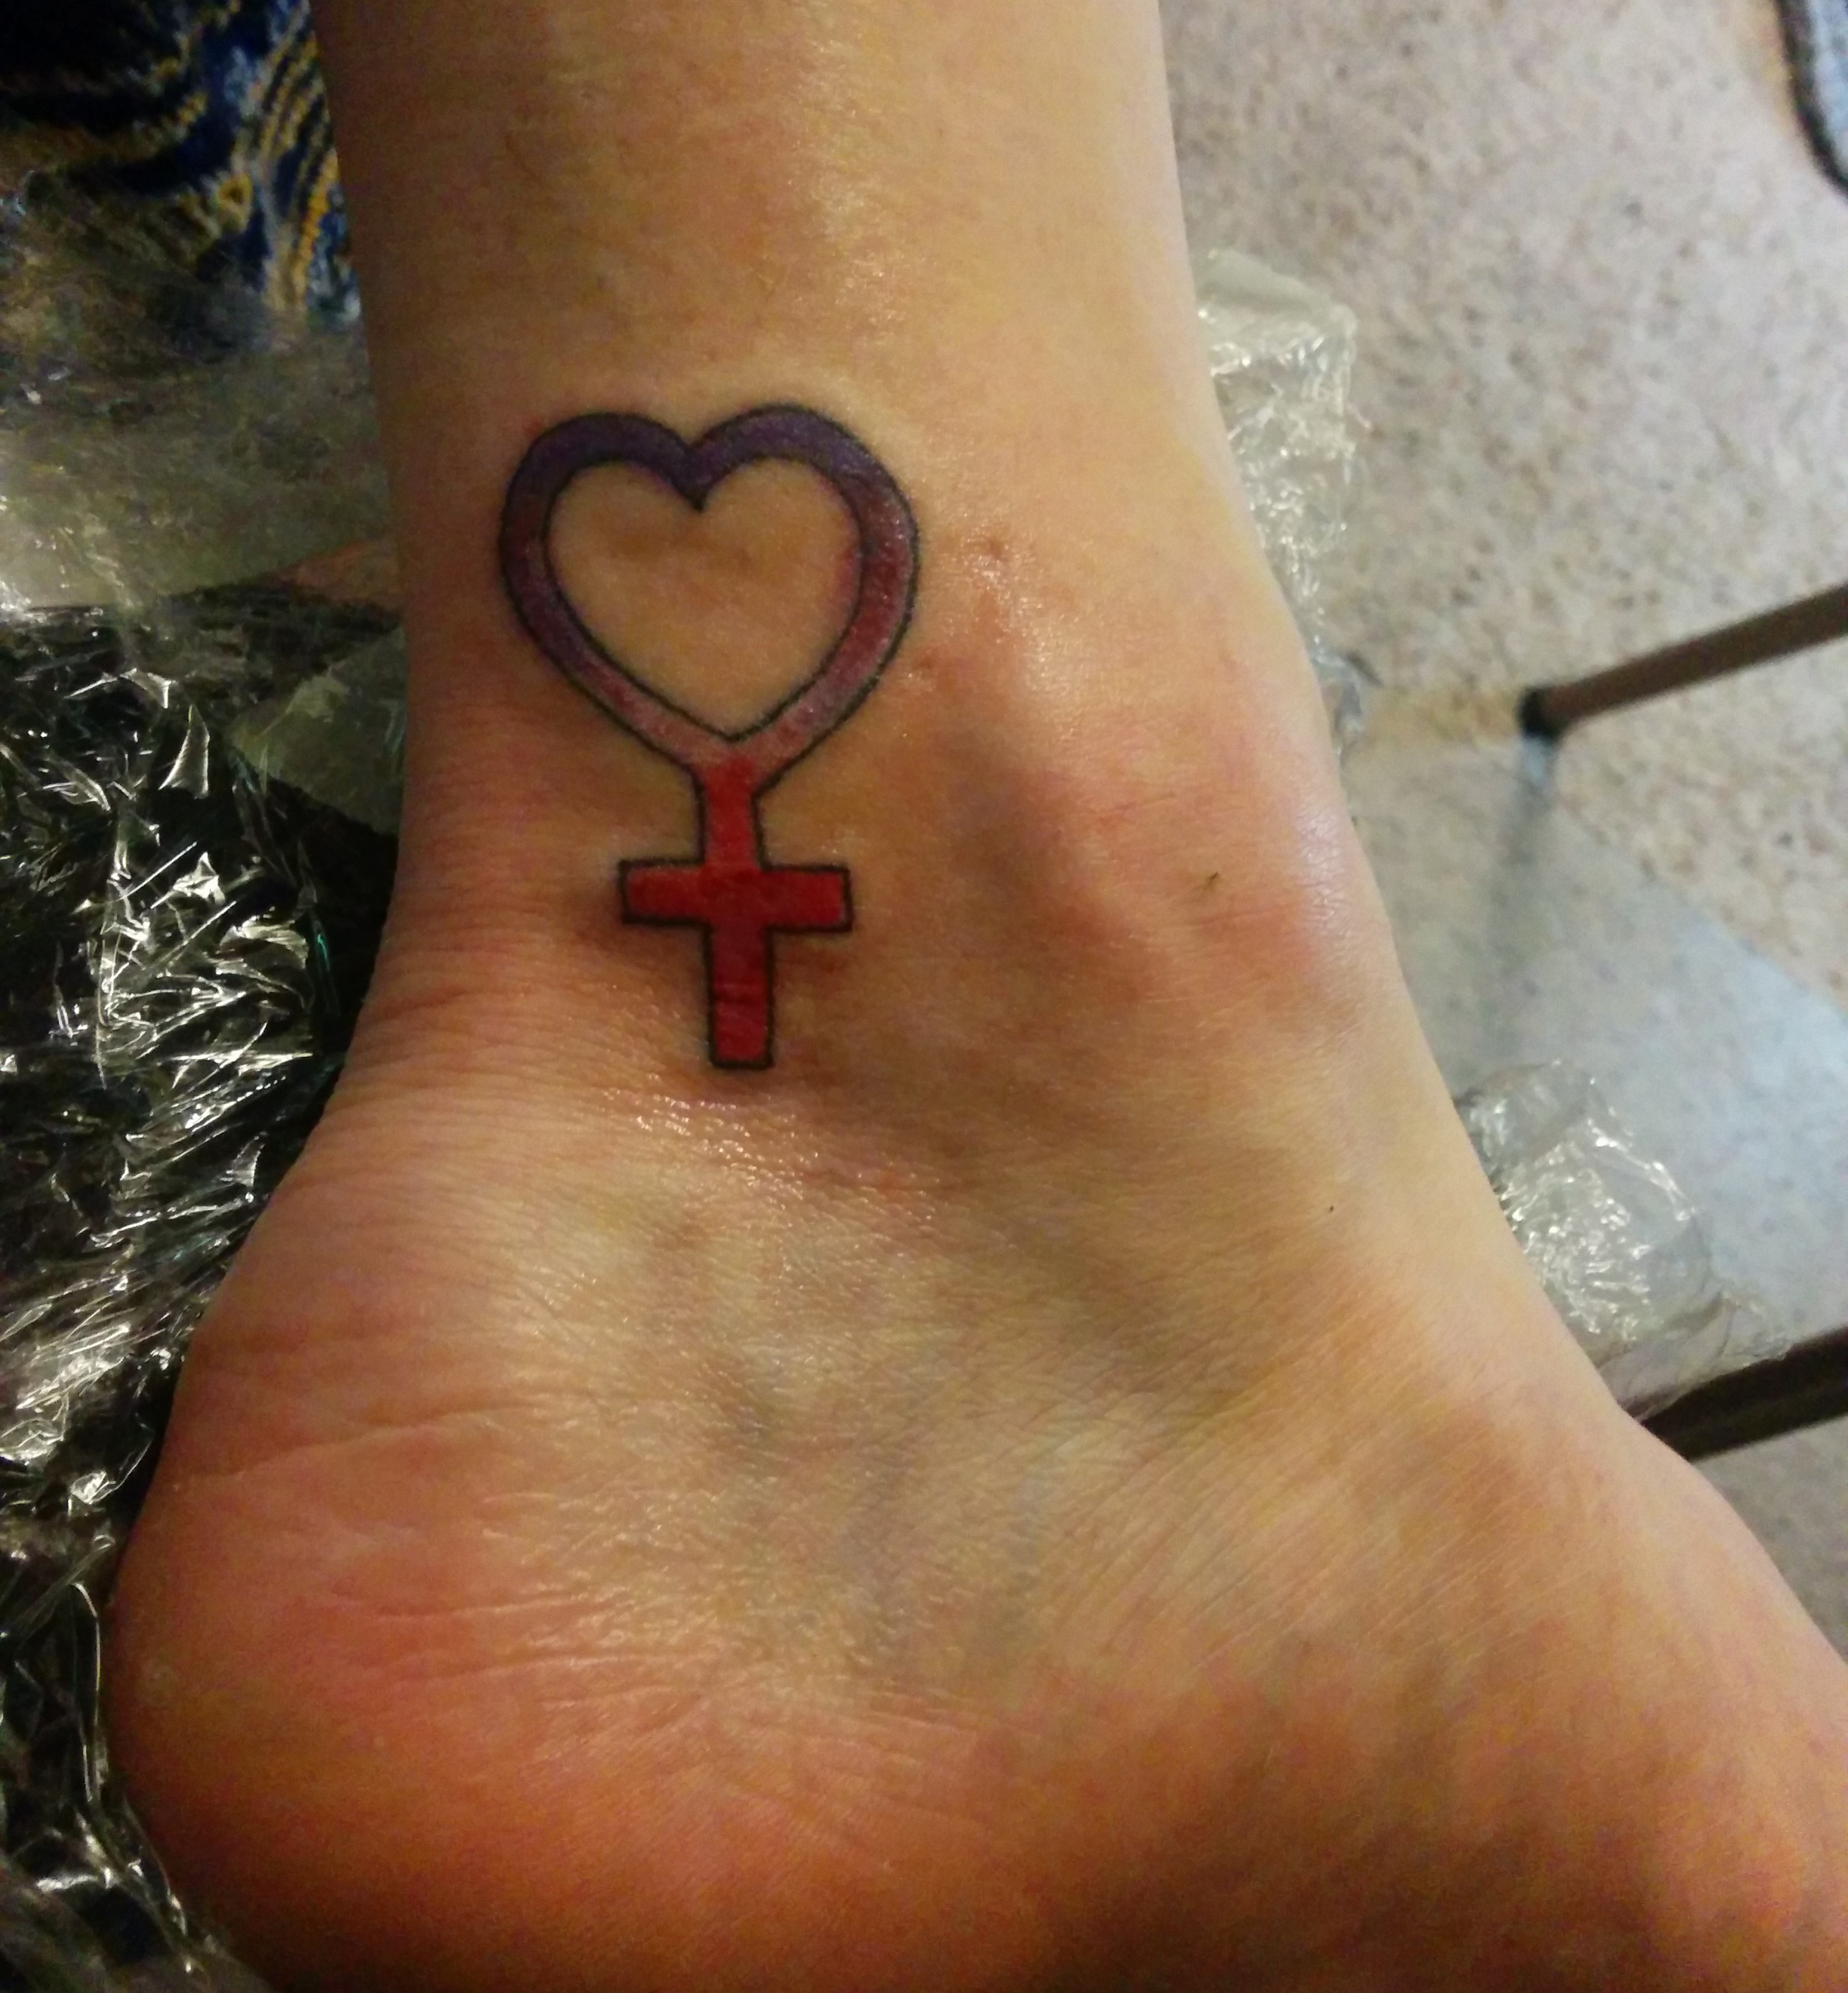 The female symbol on her ankle